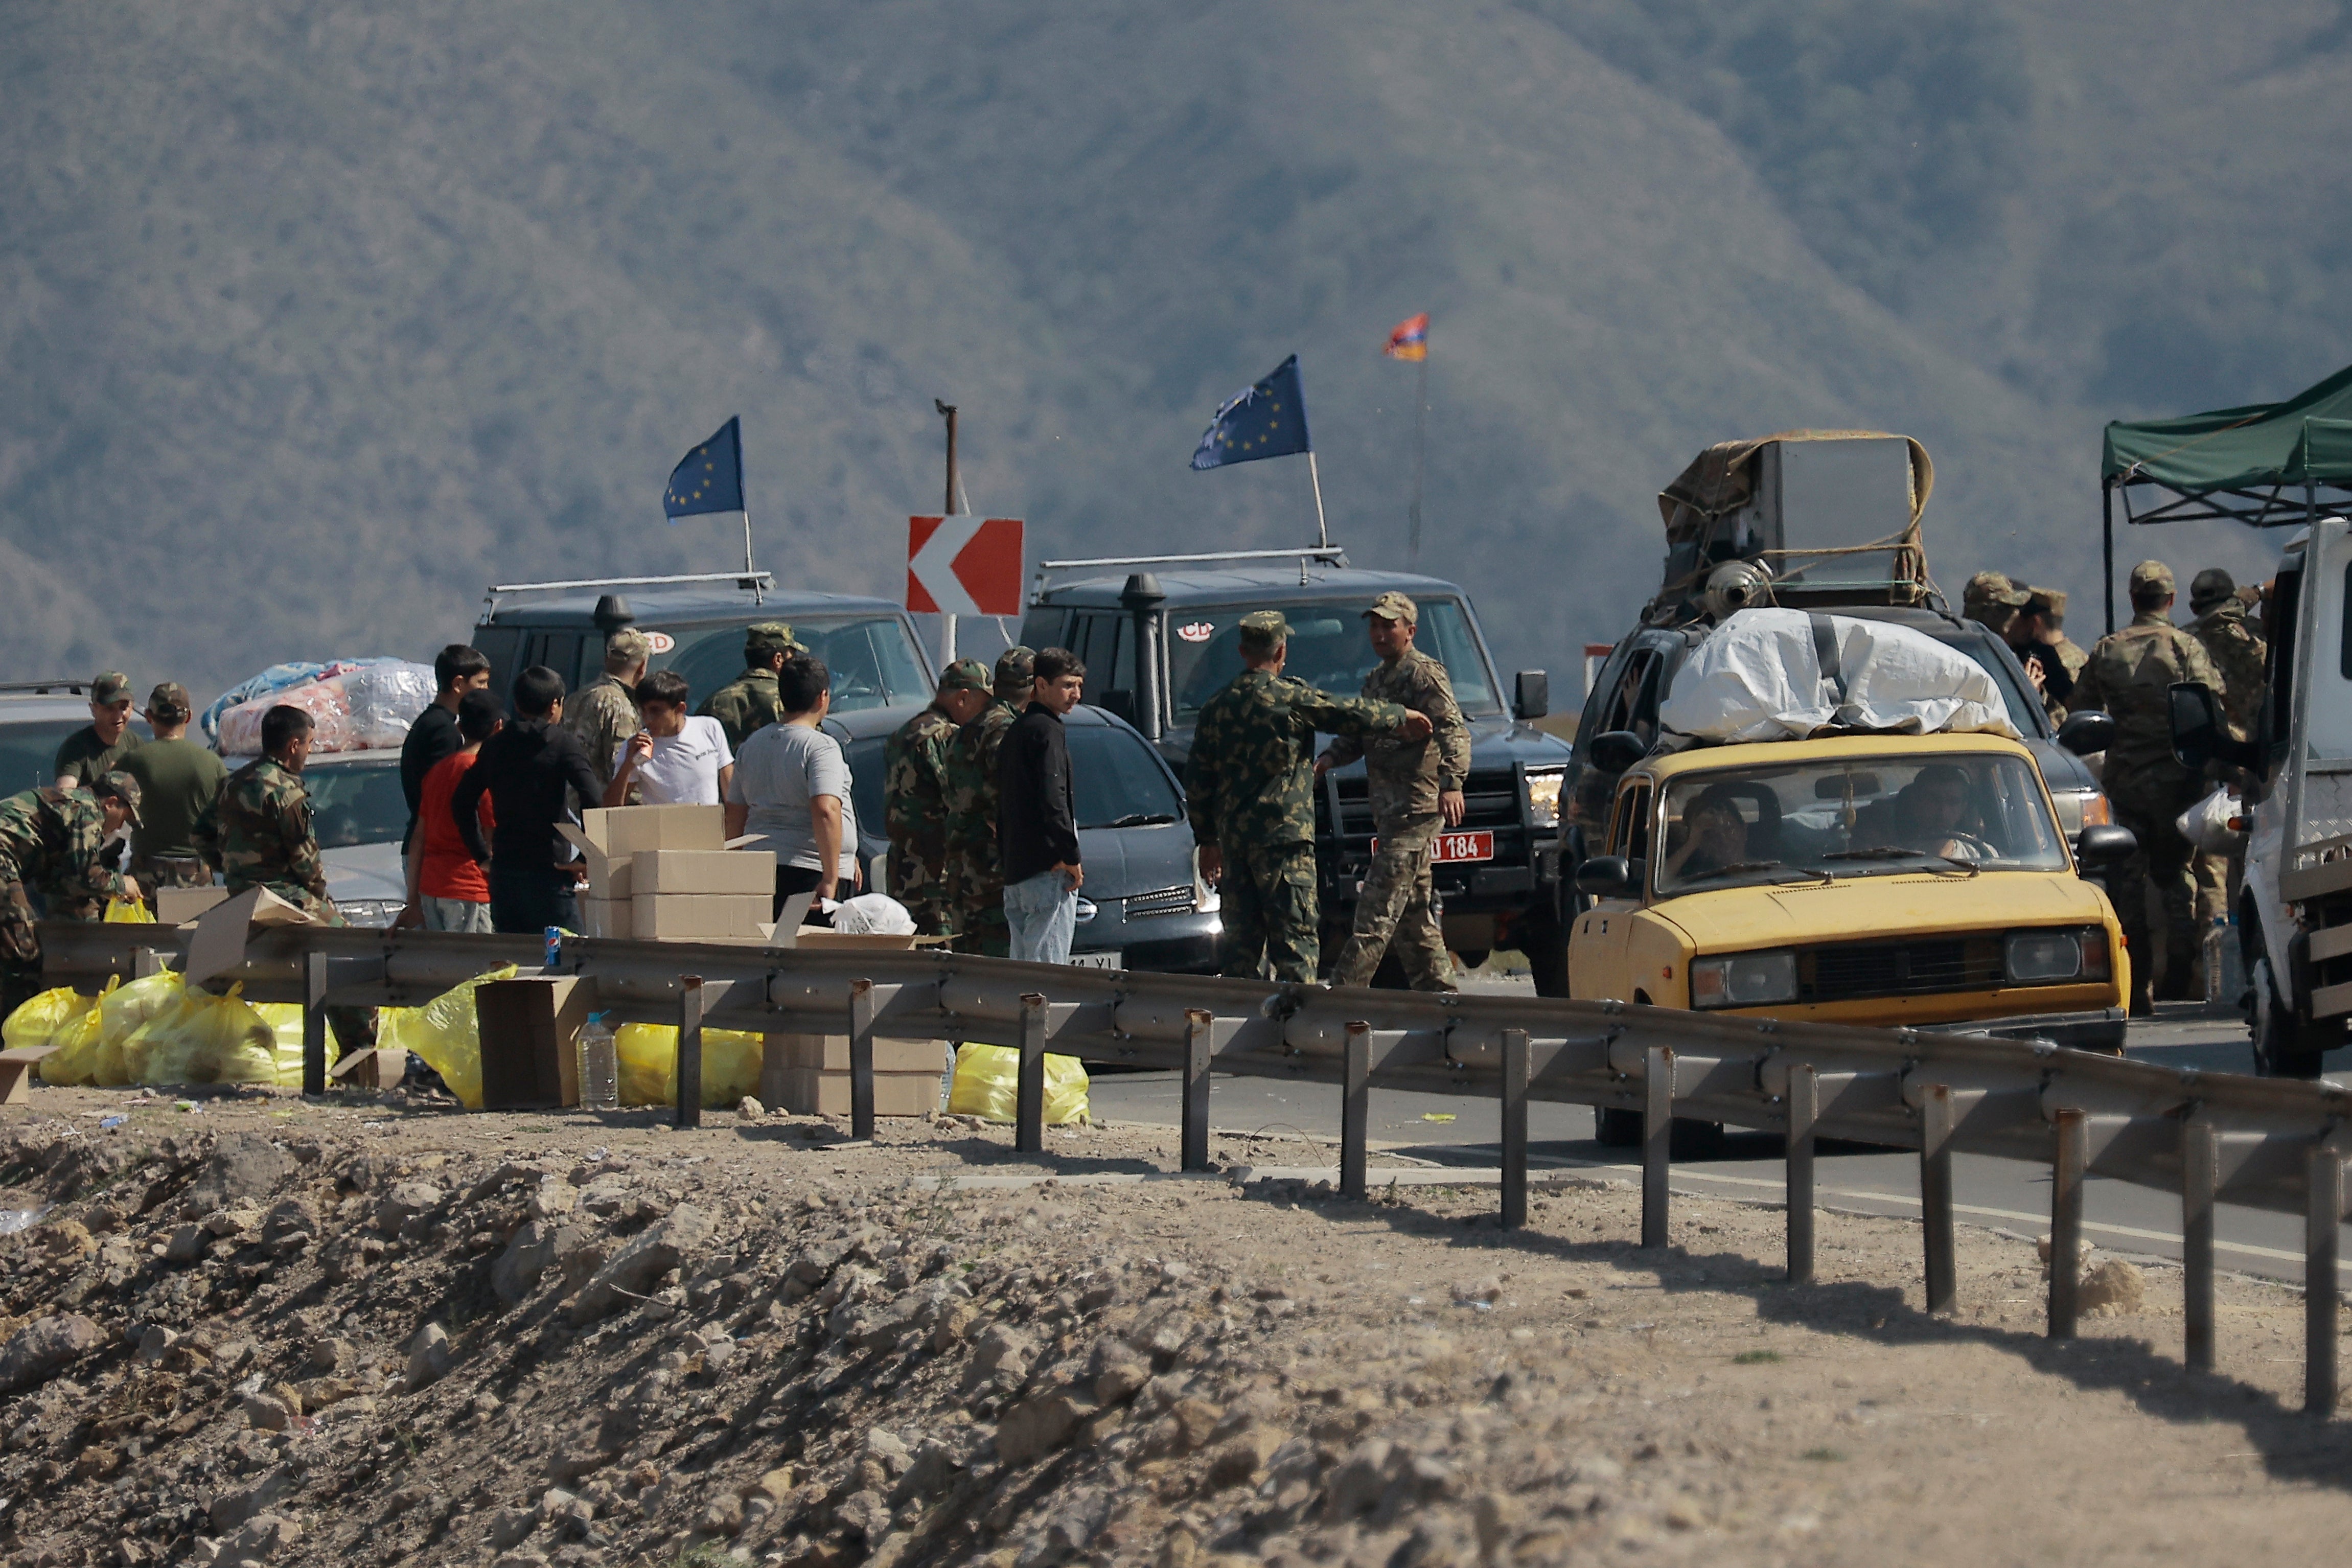 Ethnic Armenians from Nagorno-Karabakh and European Union observers drive their cars past a checkpoint on the road from Nagorno-Karabakh to Armenia’s Goris